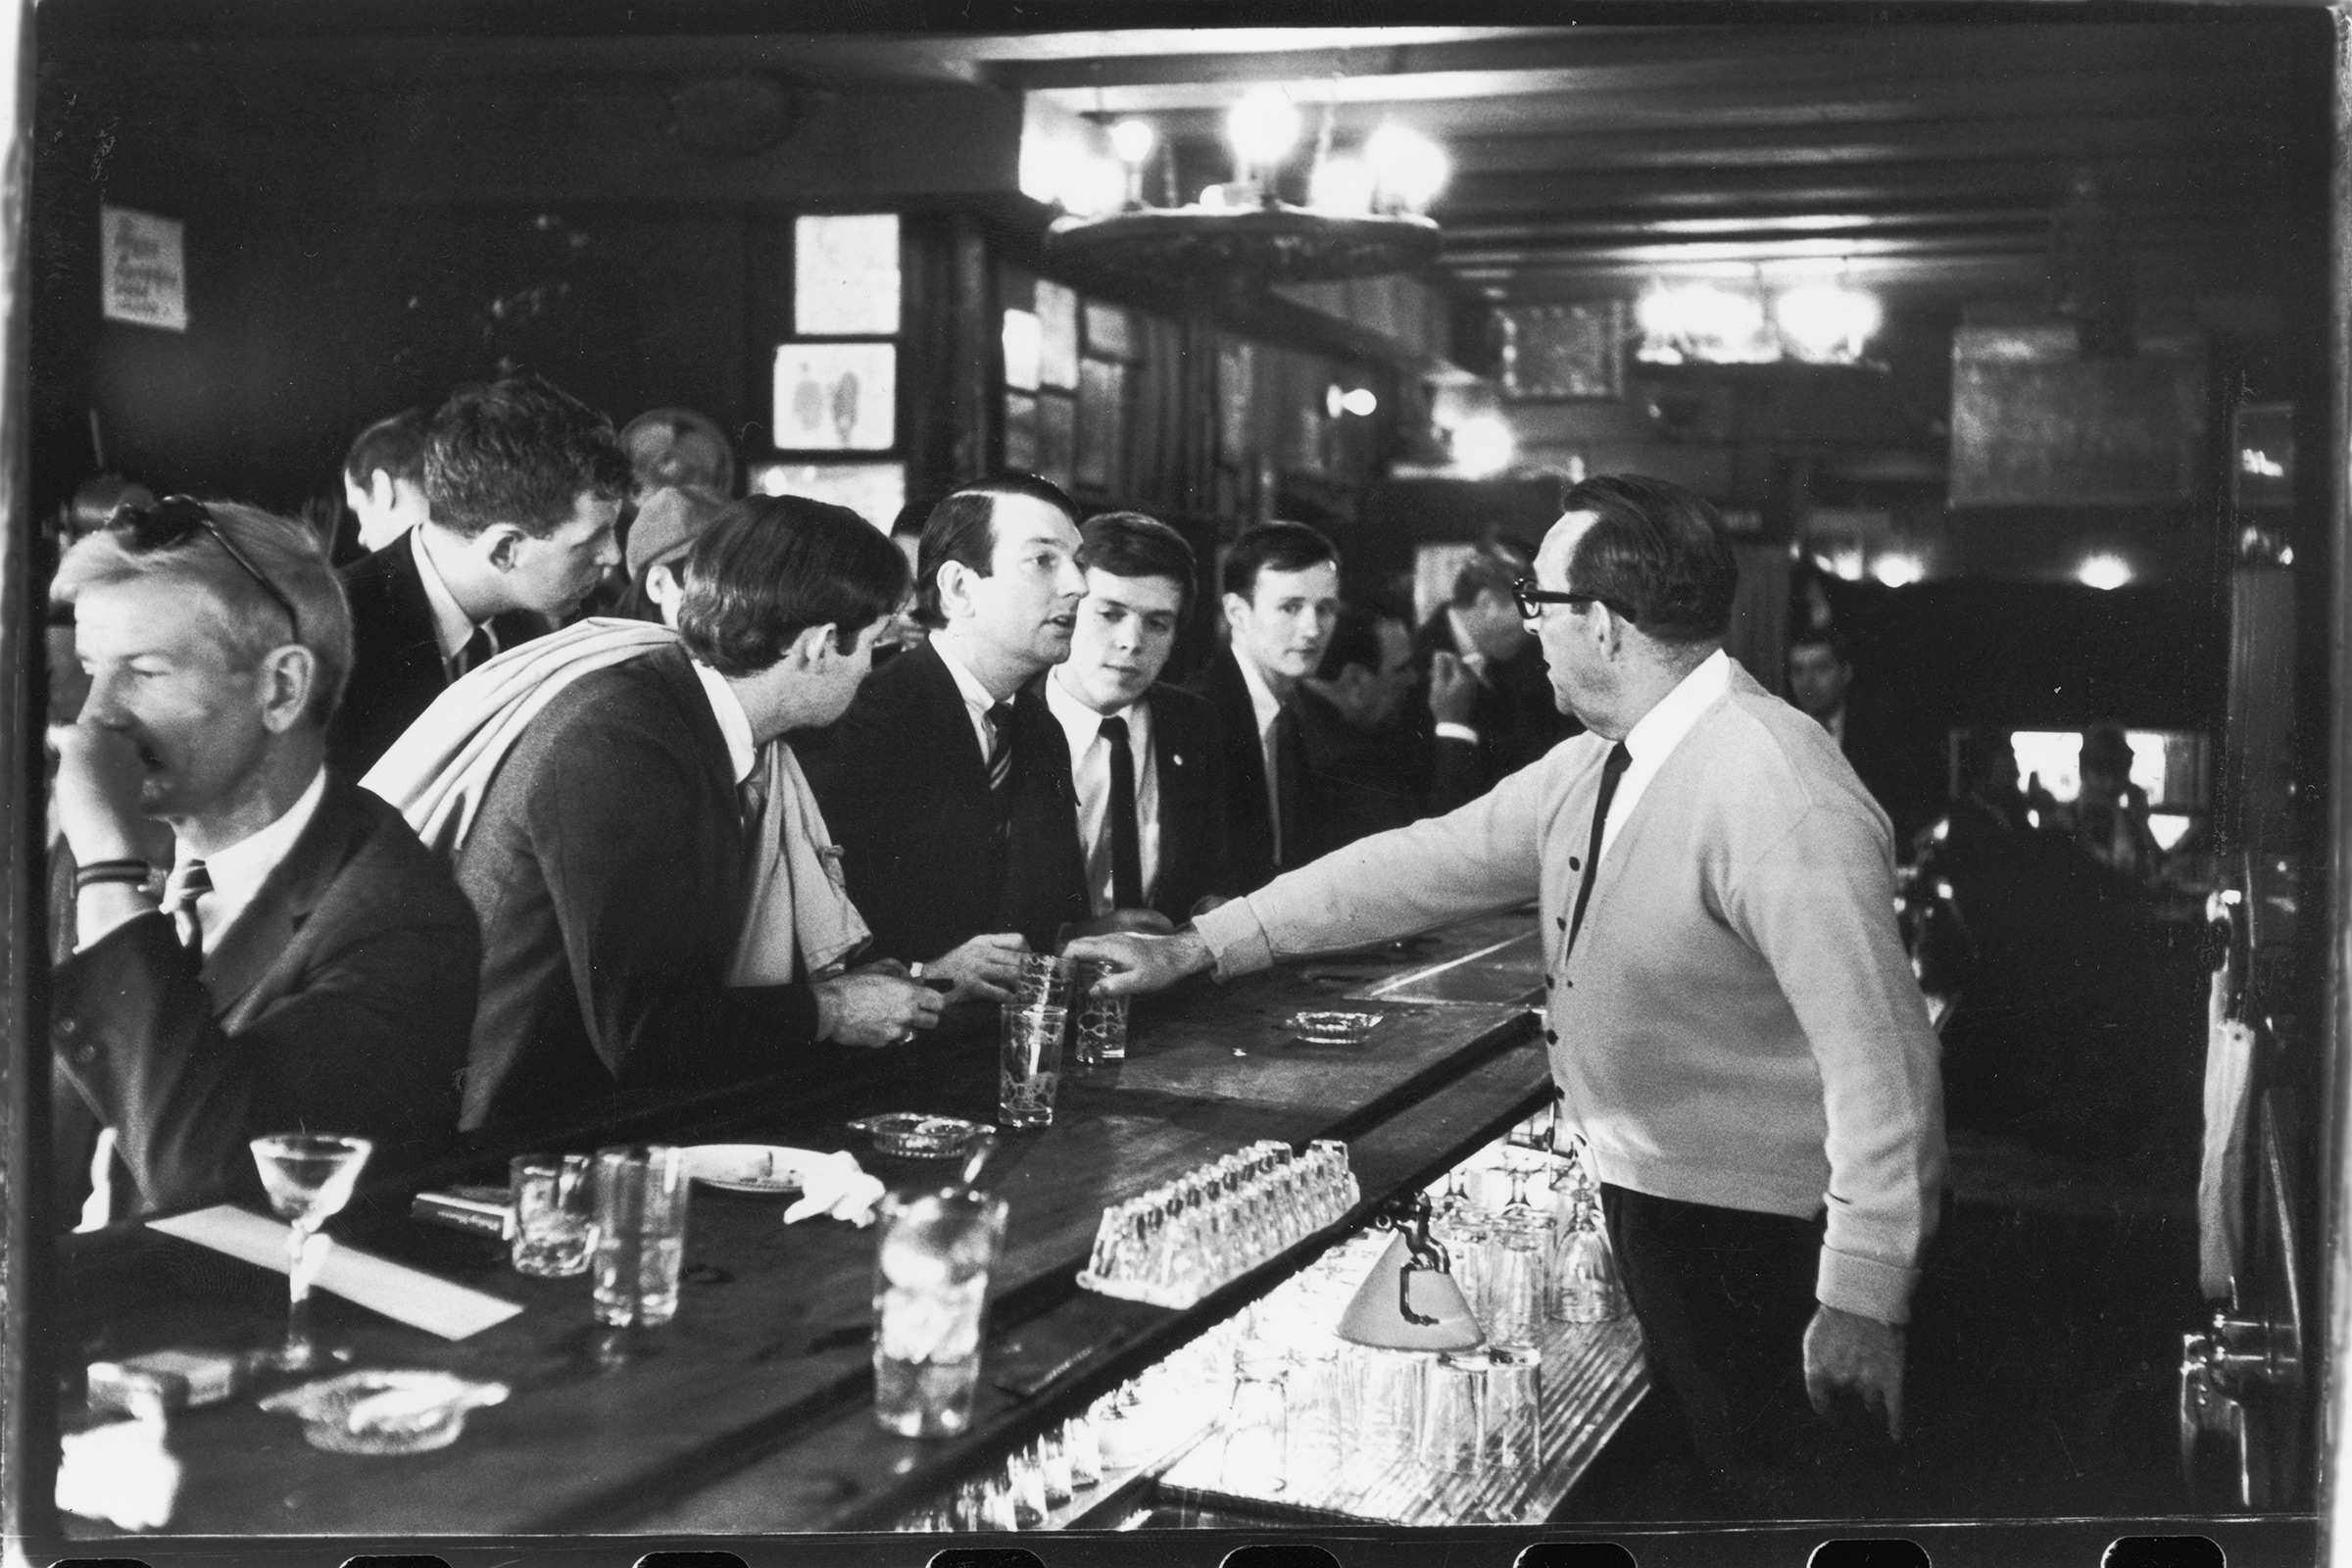 After pouring their drinks, a bartender in Julius's Bar refuses to serve (from left to right) John Timmins, Dick Leitsch, Craig Rodwell, and Randy Wicker, members of the Mattachine Society, who were protesting New York liquor laws that prevented serving gay customers, in New York, on April 21, 1966. (Fred W. McDarrah—Getty Images)